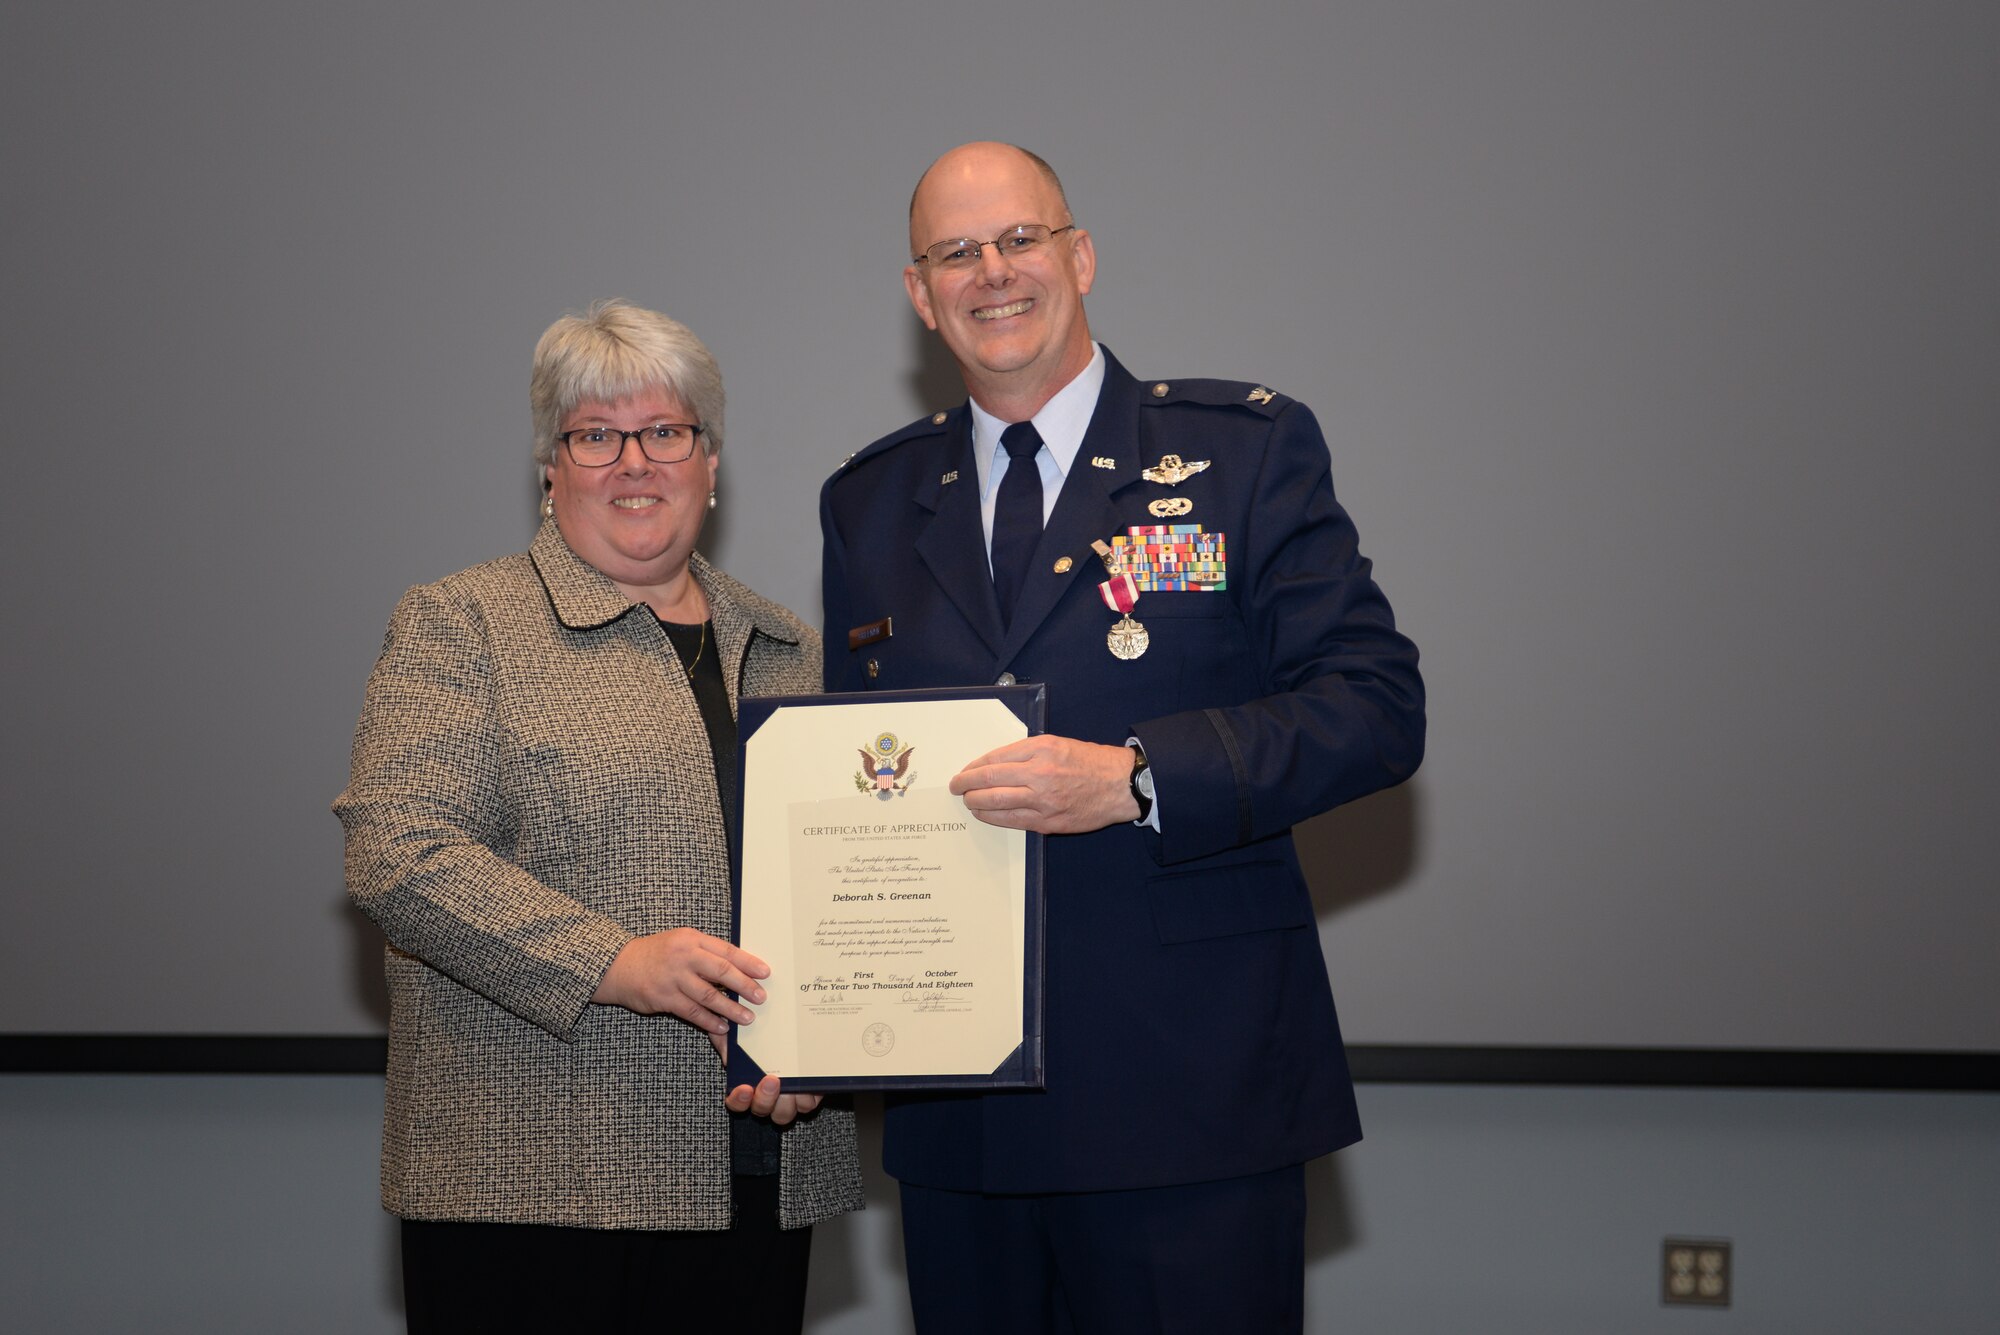 Col John C. Greenan, and is wife, Debrah Greenan, pose for a picture after Mrs. Greenan received her Spouse Appreciation Certificate during her husbands retirement ceremony, Oct 13, 2018 at Pease Air National Guard Base, N.H. (Photo by Staff Sgt. Ashlyn J. Correia N.H. Air National Guard)